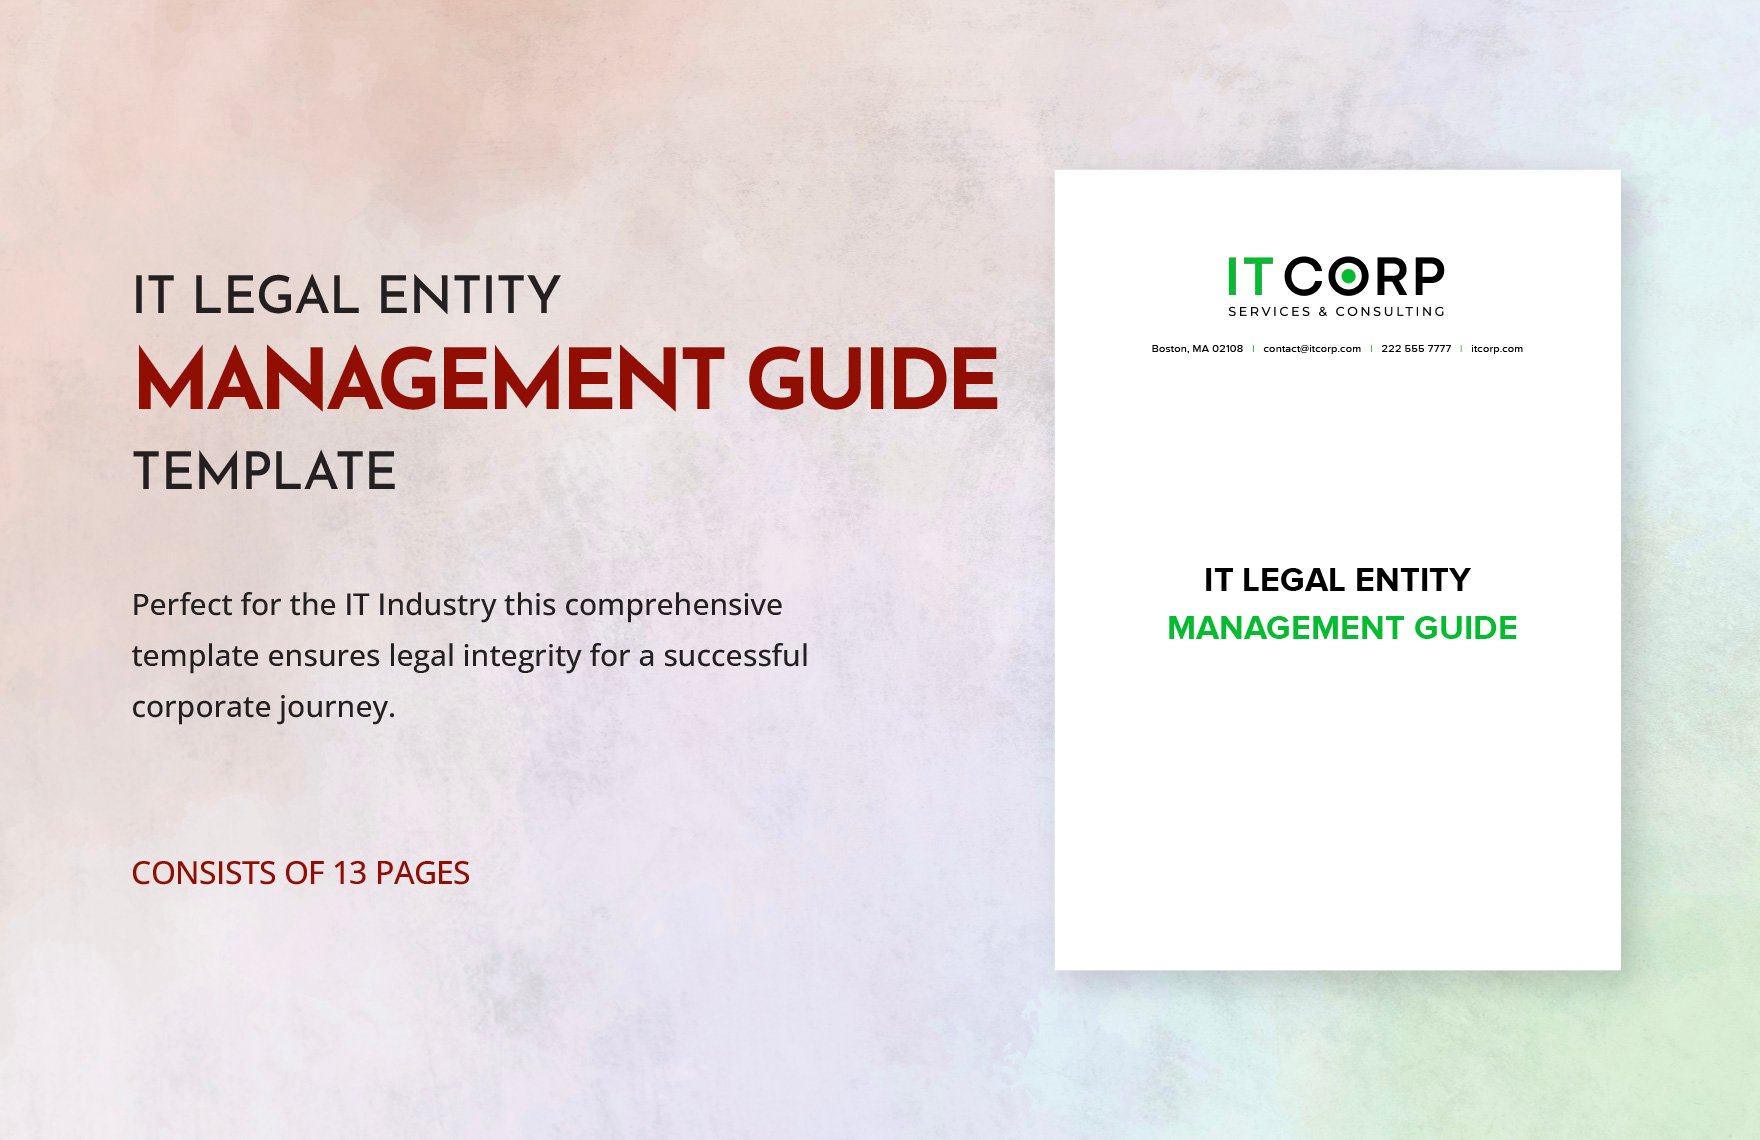 IT Legal Entity Management Guide Template in Word, Google Docs, PDF